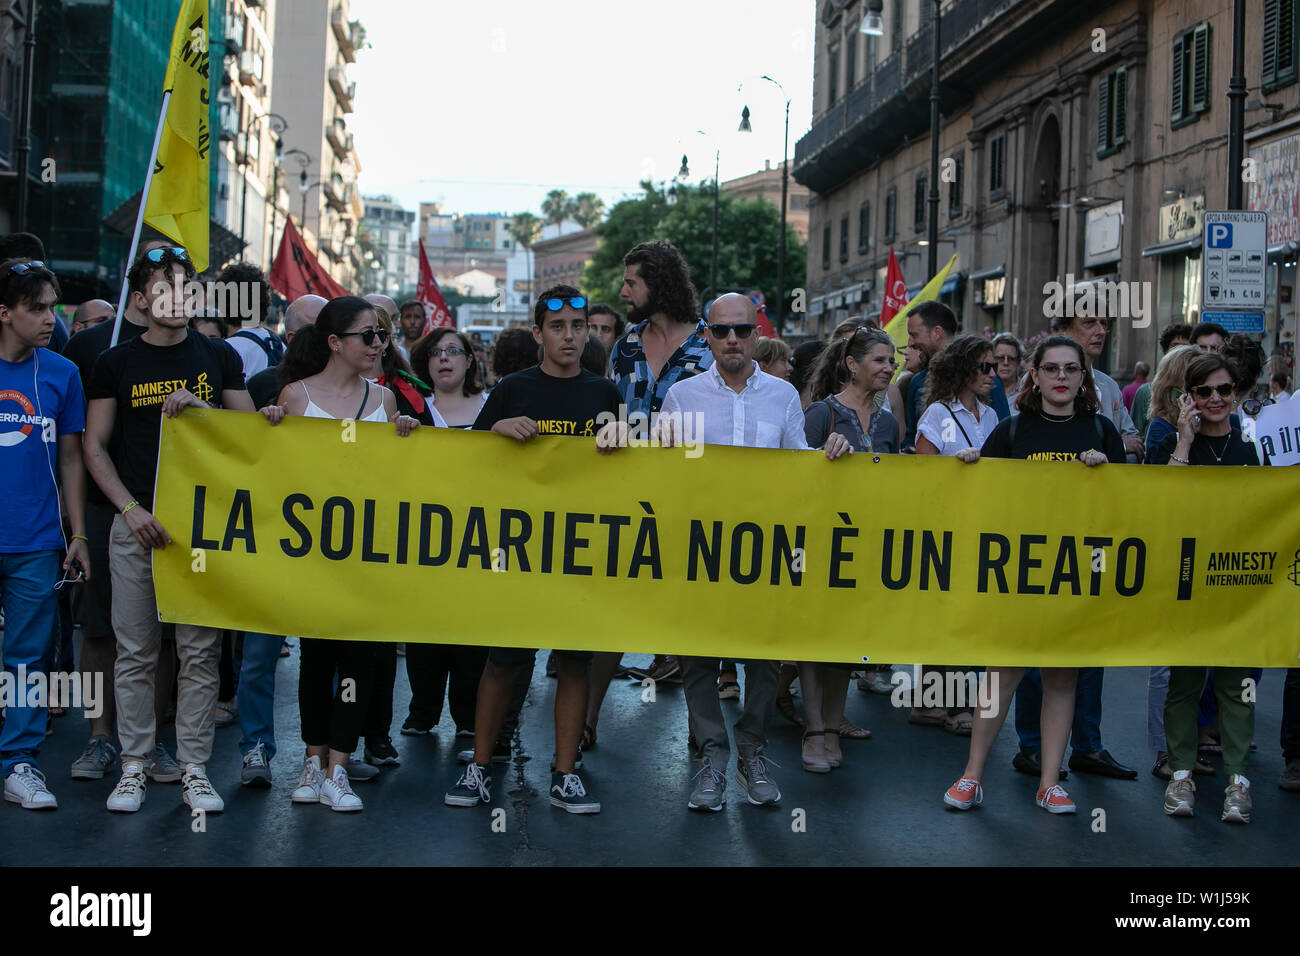 Palermo, Italy. 02nd July, 2019. Amnesty International militants during the demonstration in Palermo to show support for Sea Watch captain Carola Rakete. Credit: Antonio Melita/Pacific Press/Alamy Live News Stock Photo